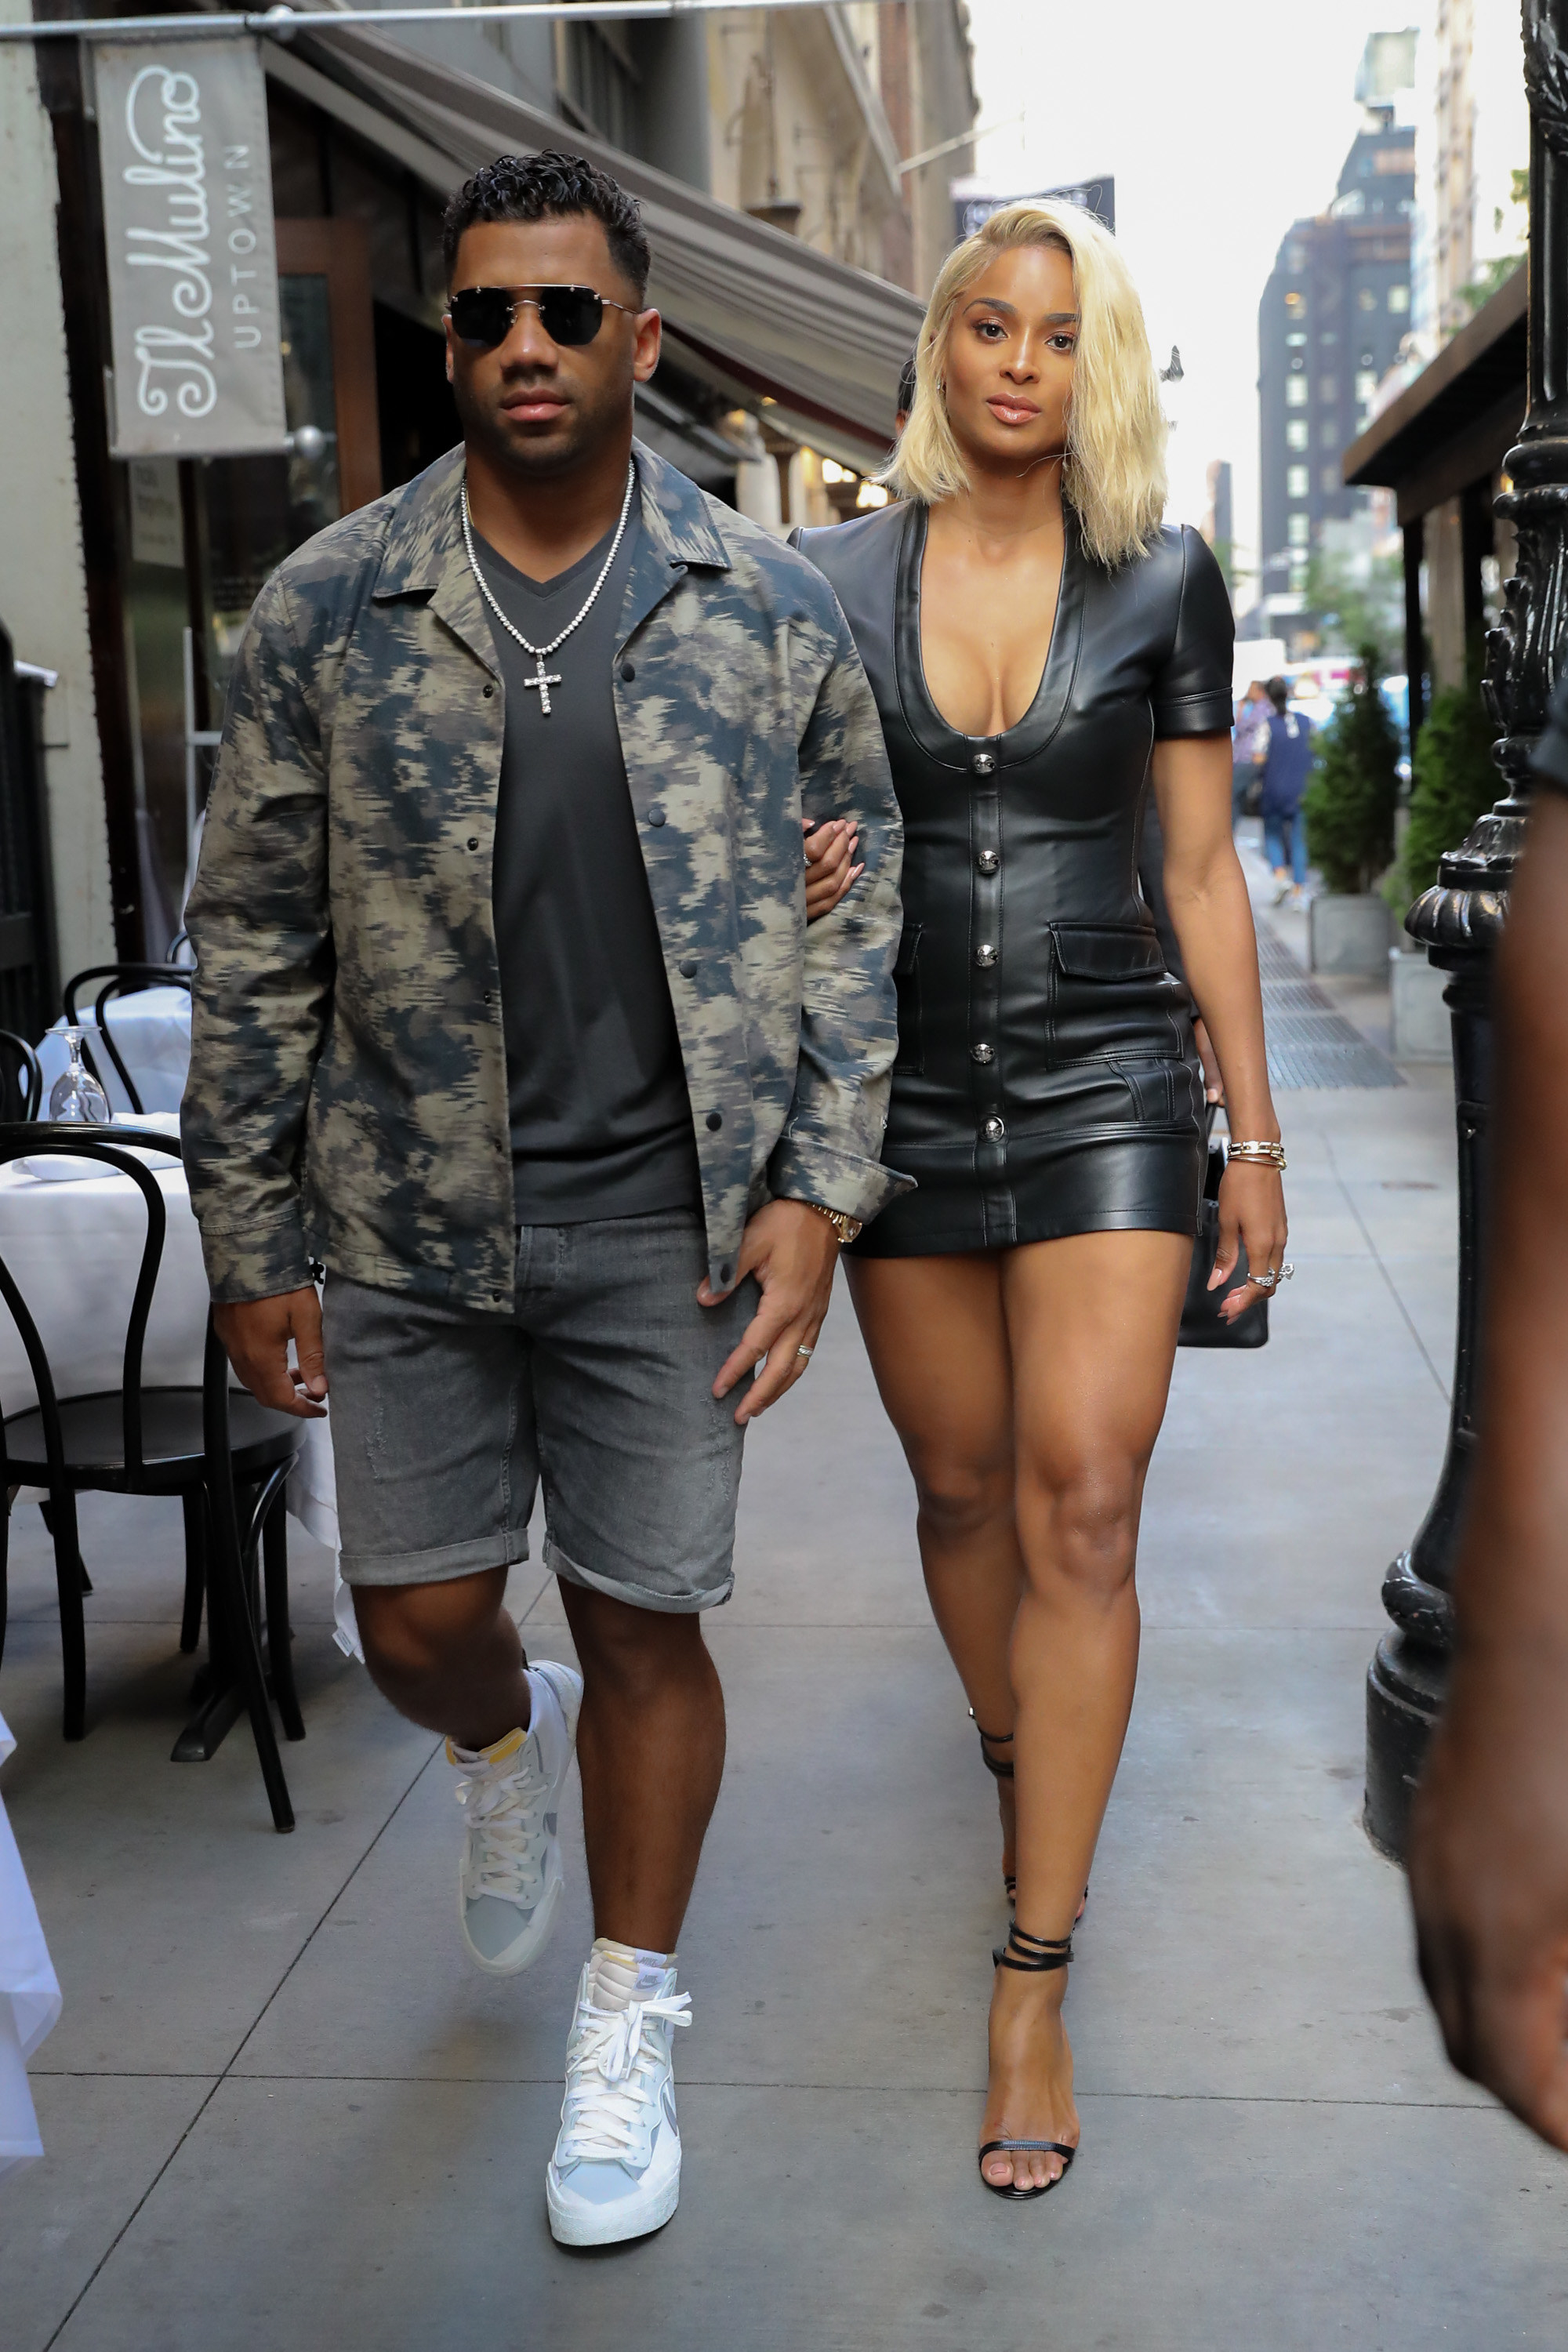 Ciara and Russell Wilson are seen arriving at Philippe Chow for dinner on June 30, 2021, in New York City, New York